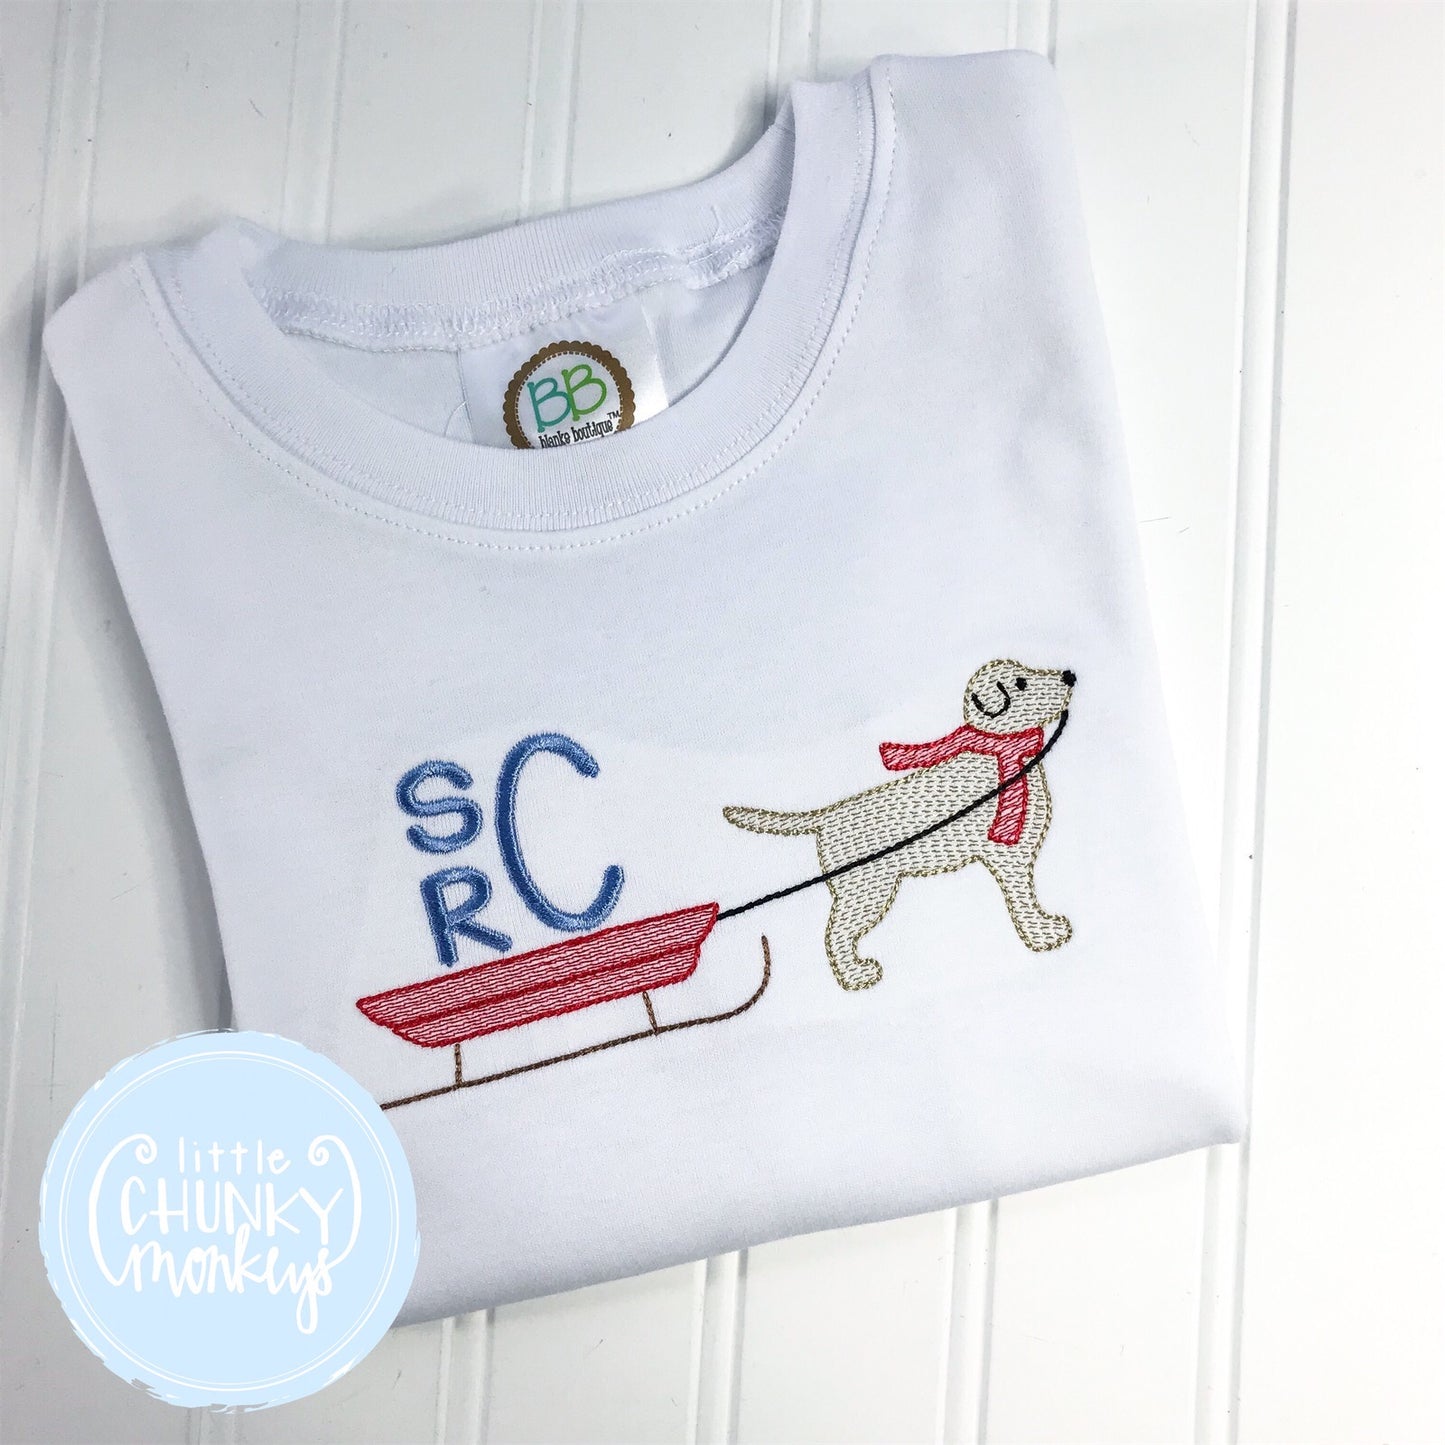 Boy Shirt -Dog Pulling Sled with Initials